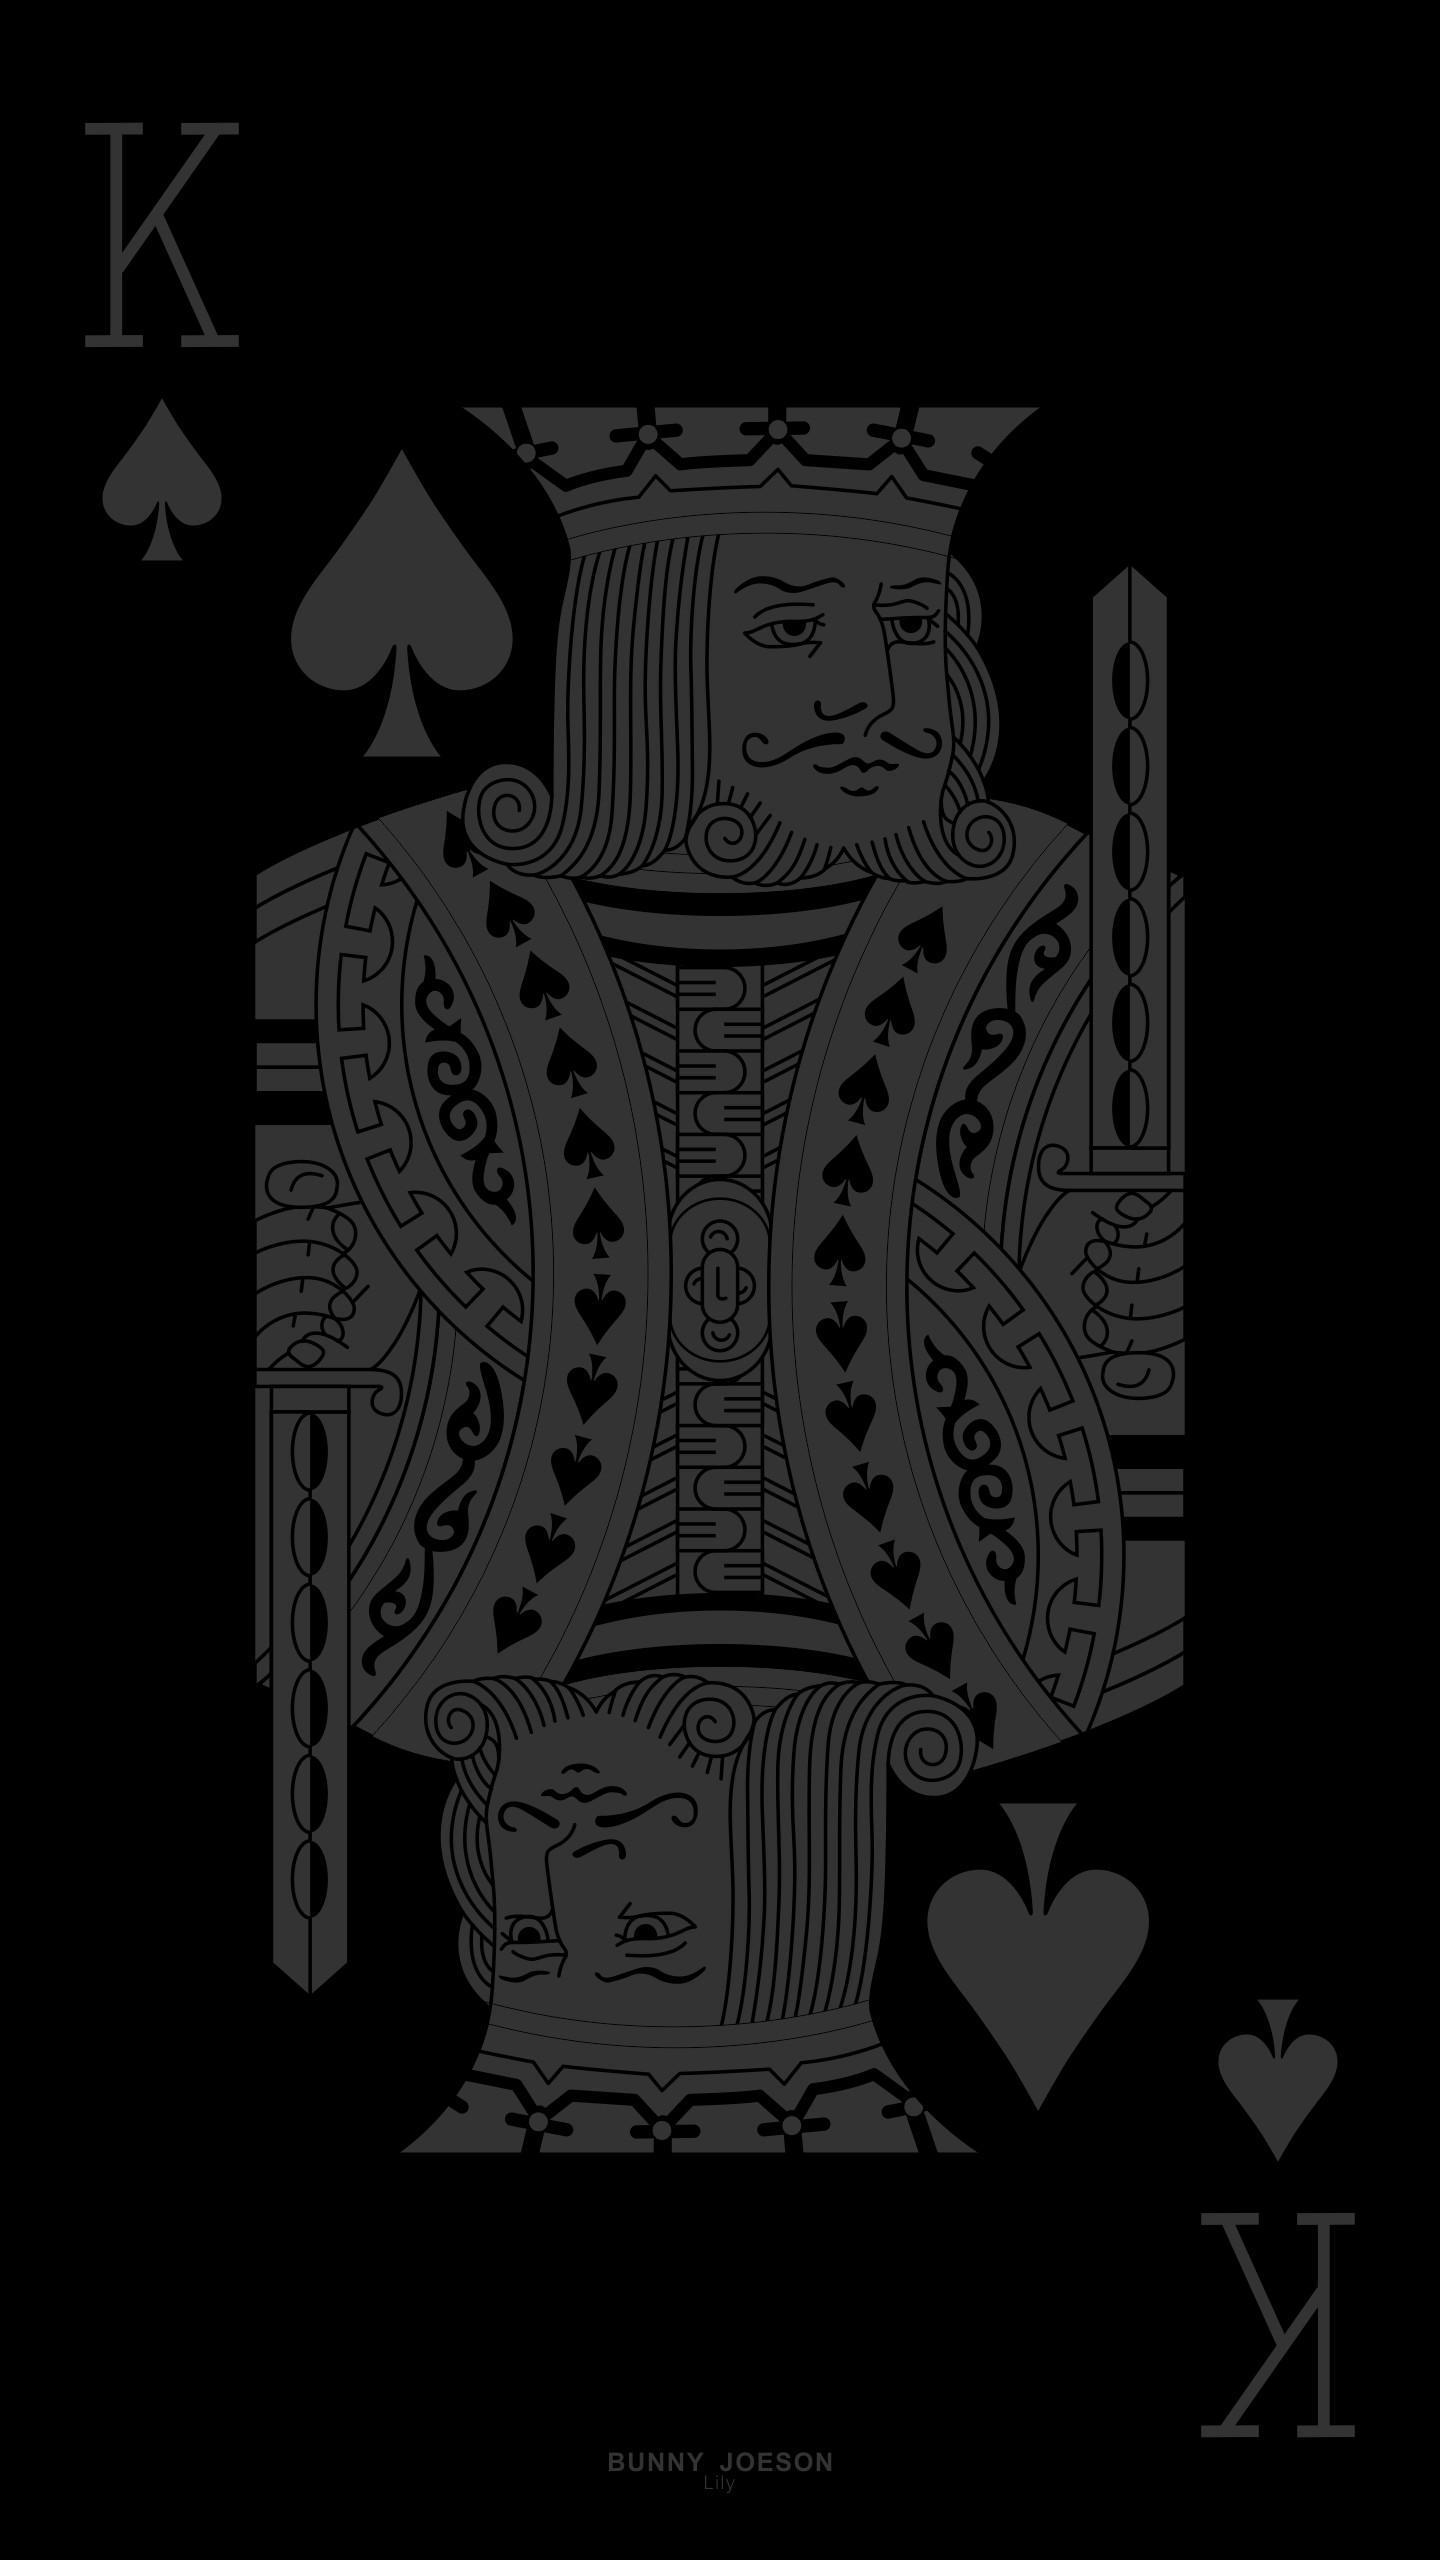 HD wallpaper four Aces playing cards wallpaper black scheme technology   Wallpaper Flare